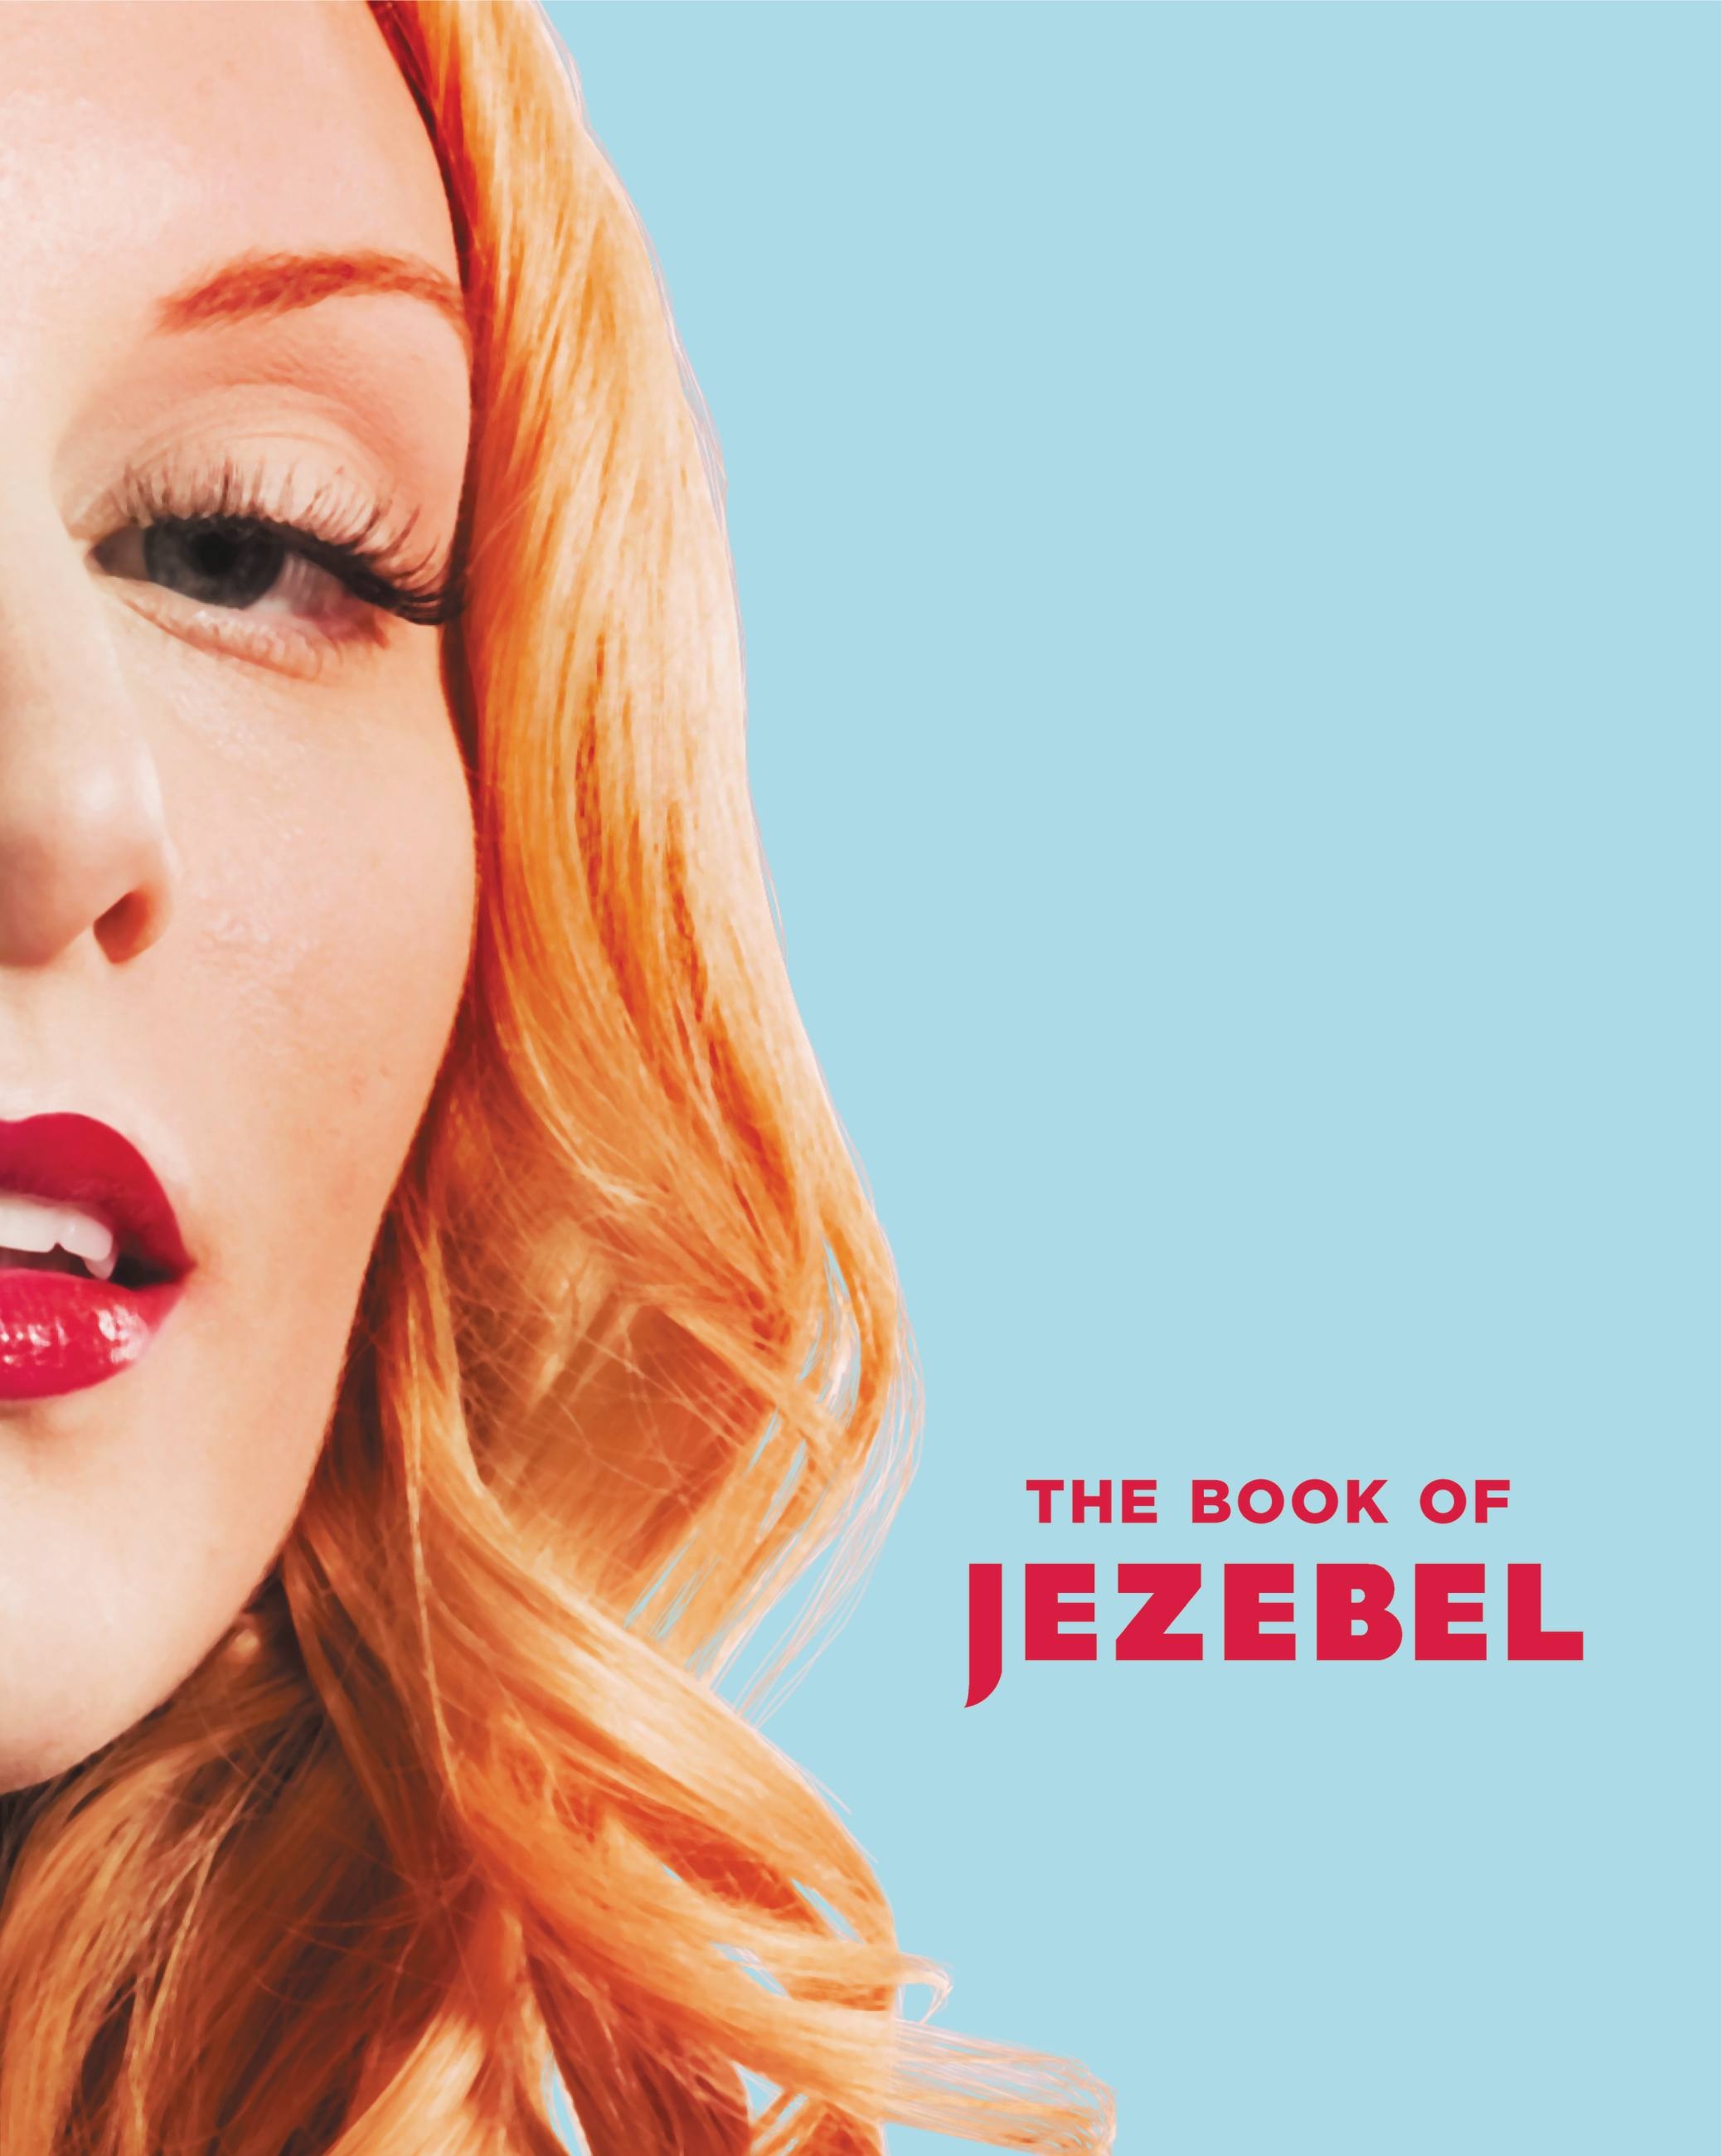 Teen Tiny Breasts - The Book of Jezebel by Anna Holmes | Hachette Book Group